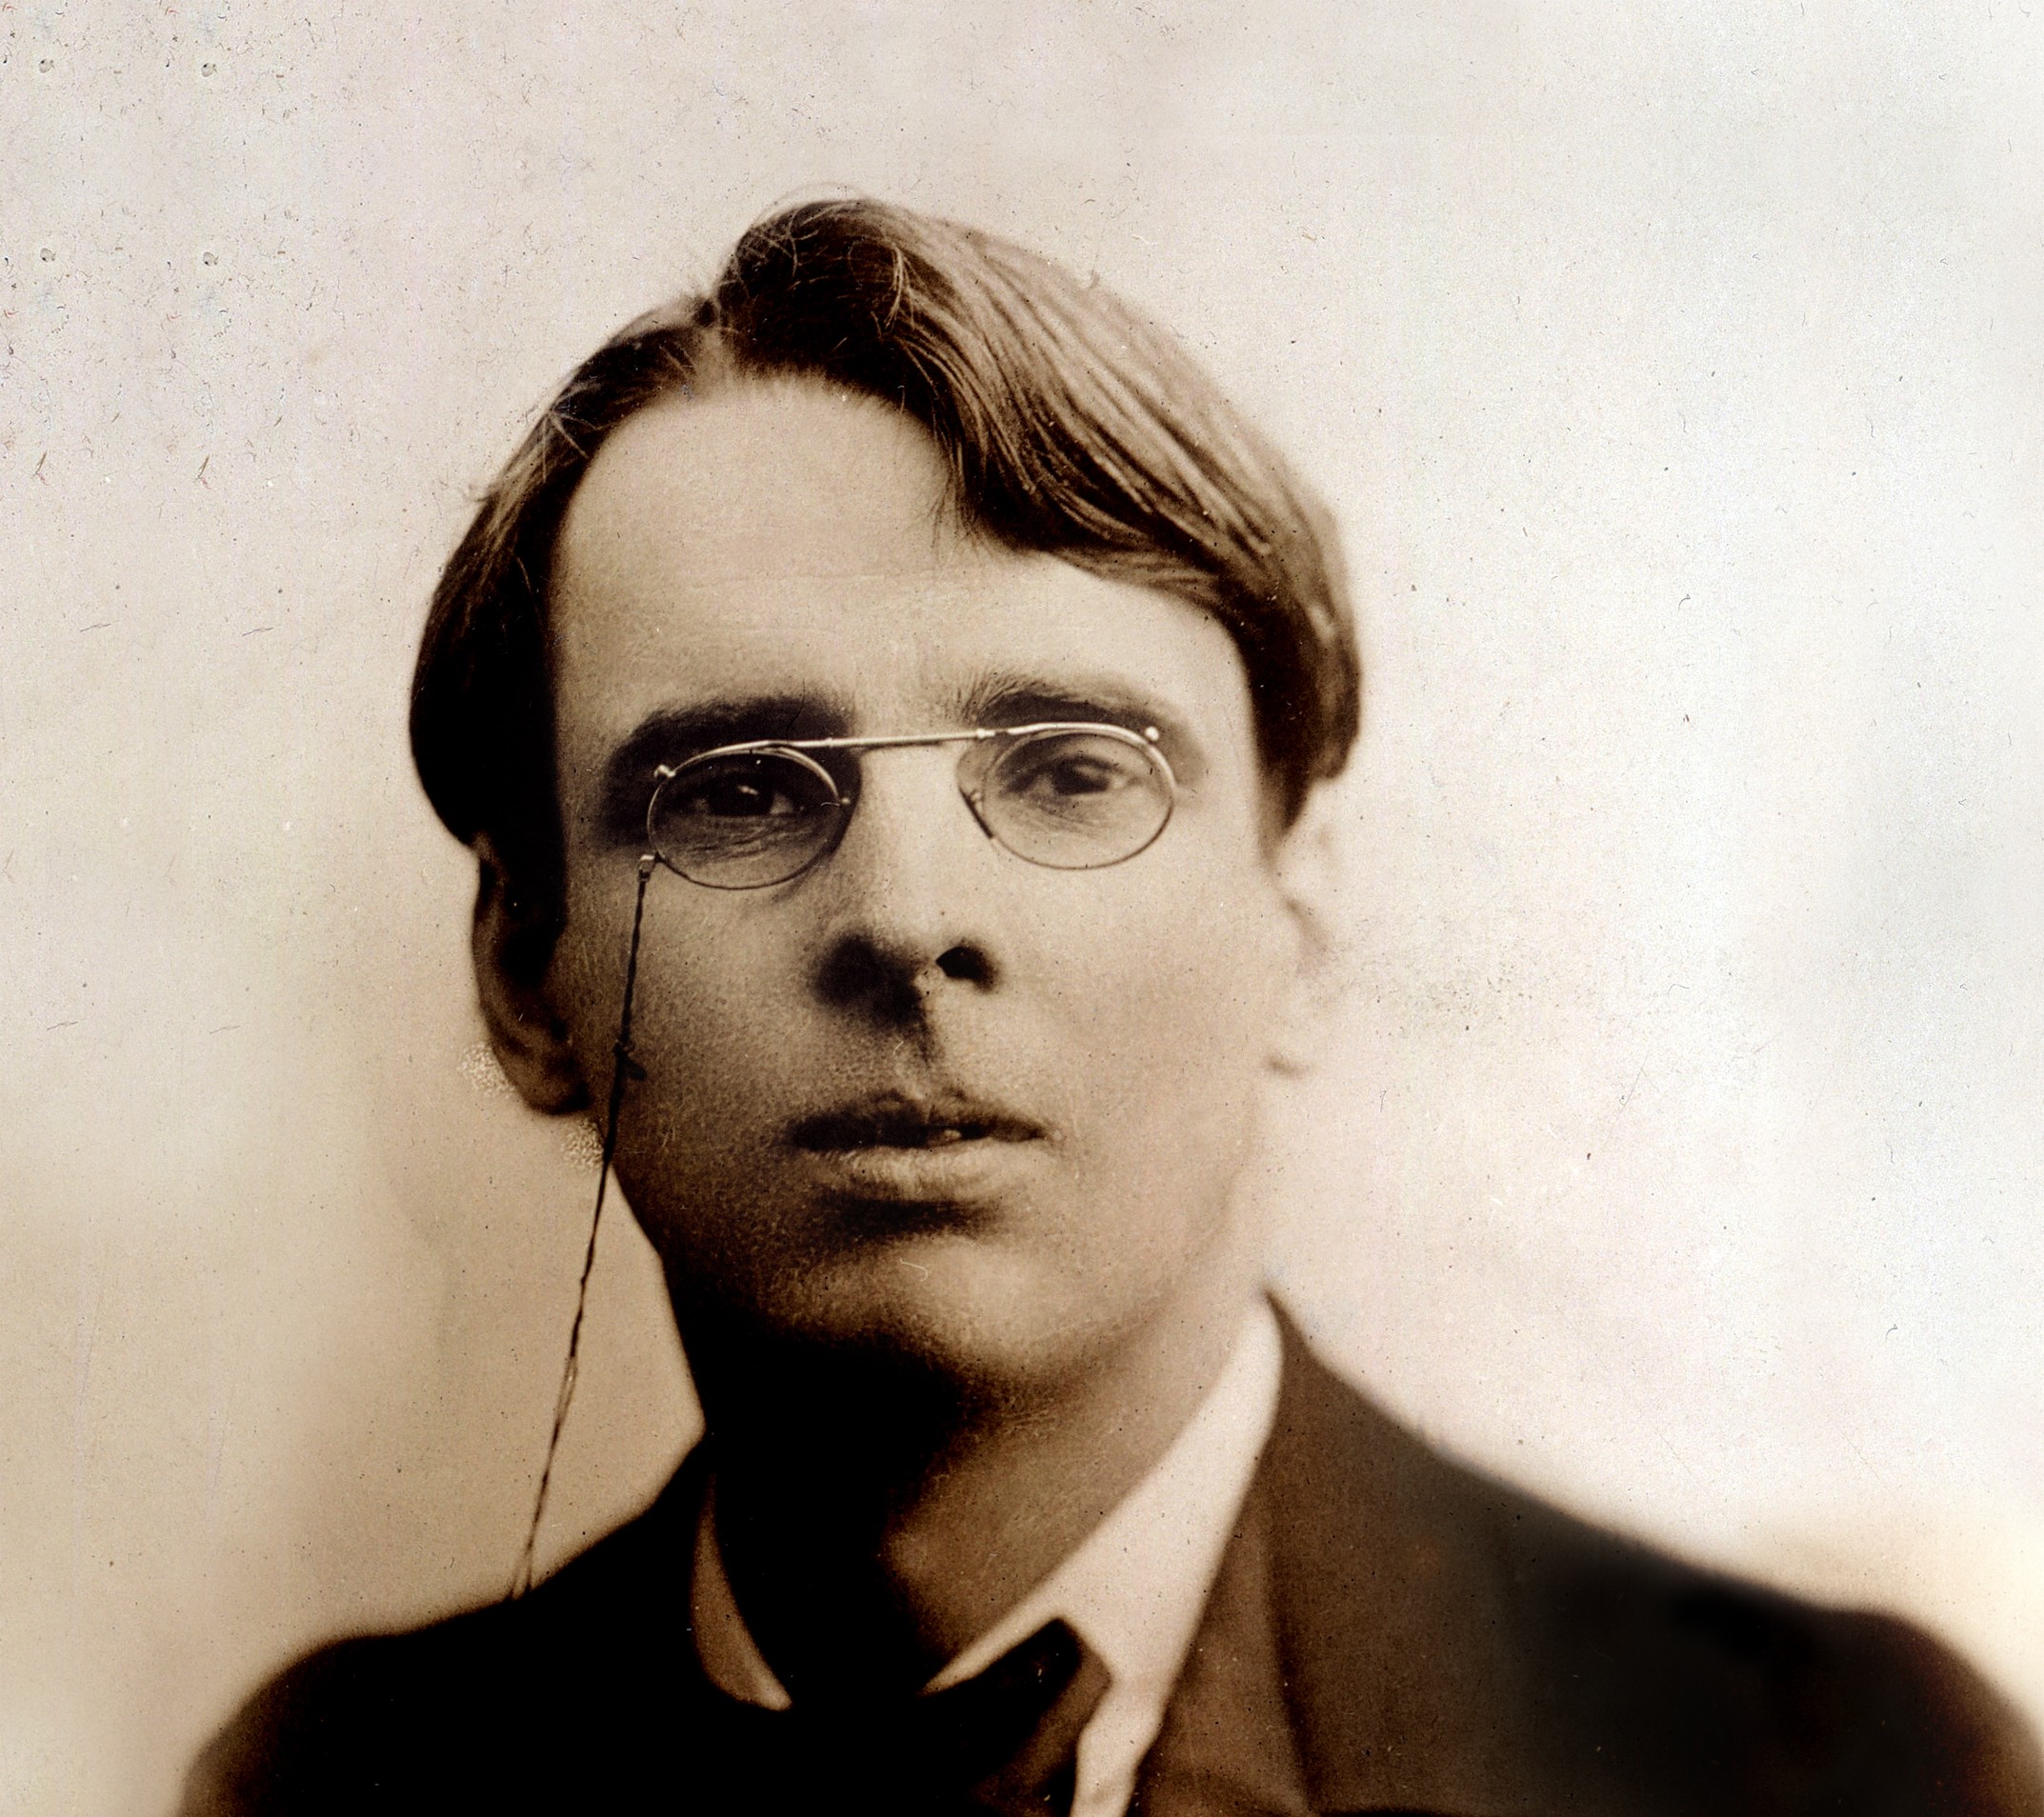 W. B. Yeats: “the labyrinth of another’s being”